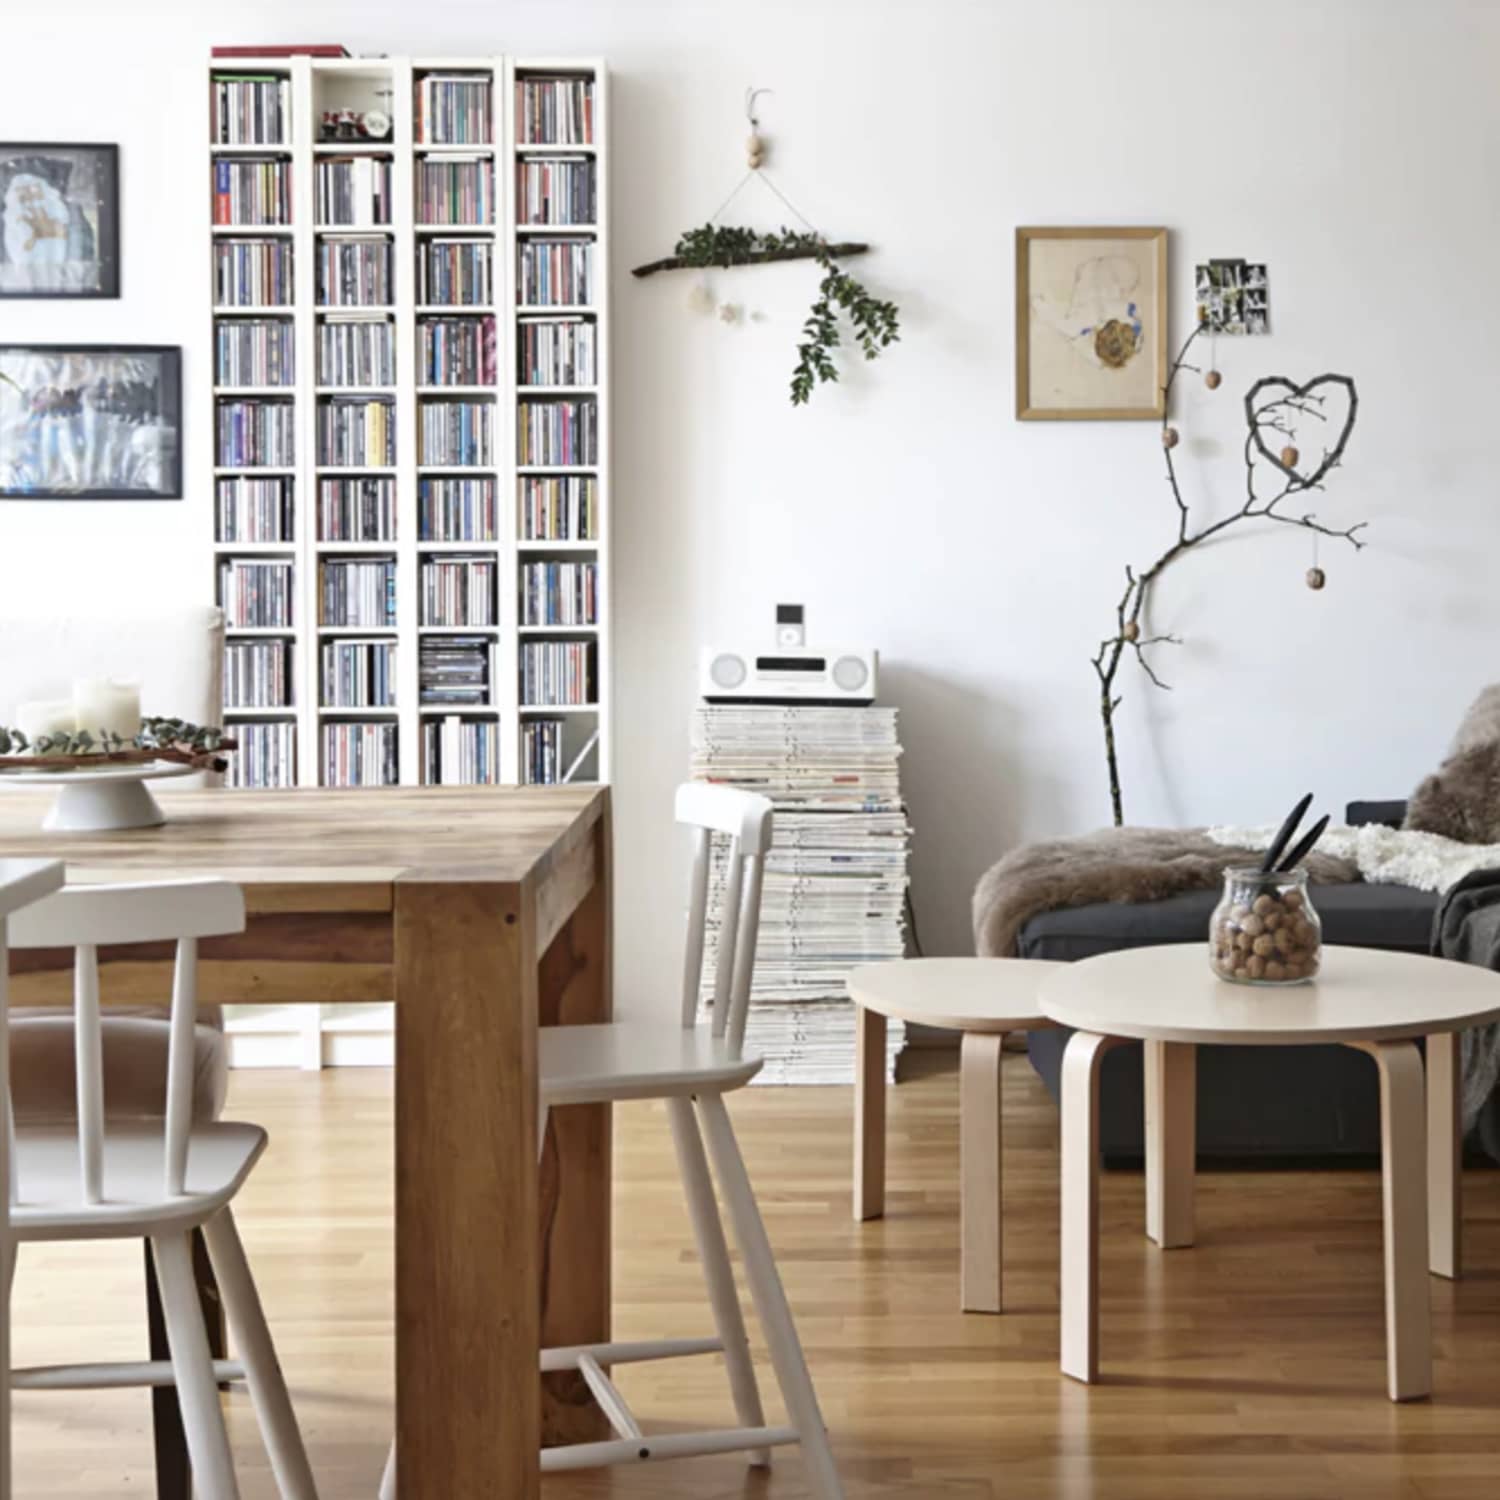 15 Space-Saving Bookshelves for Small Spaces